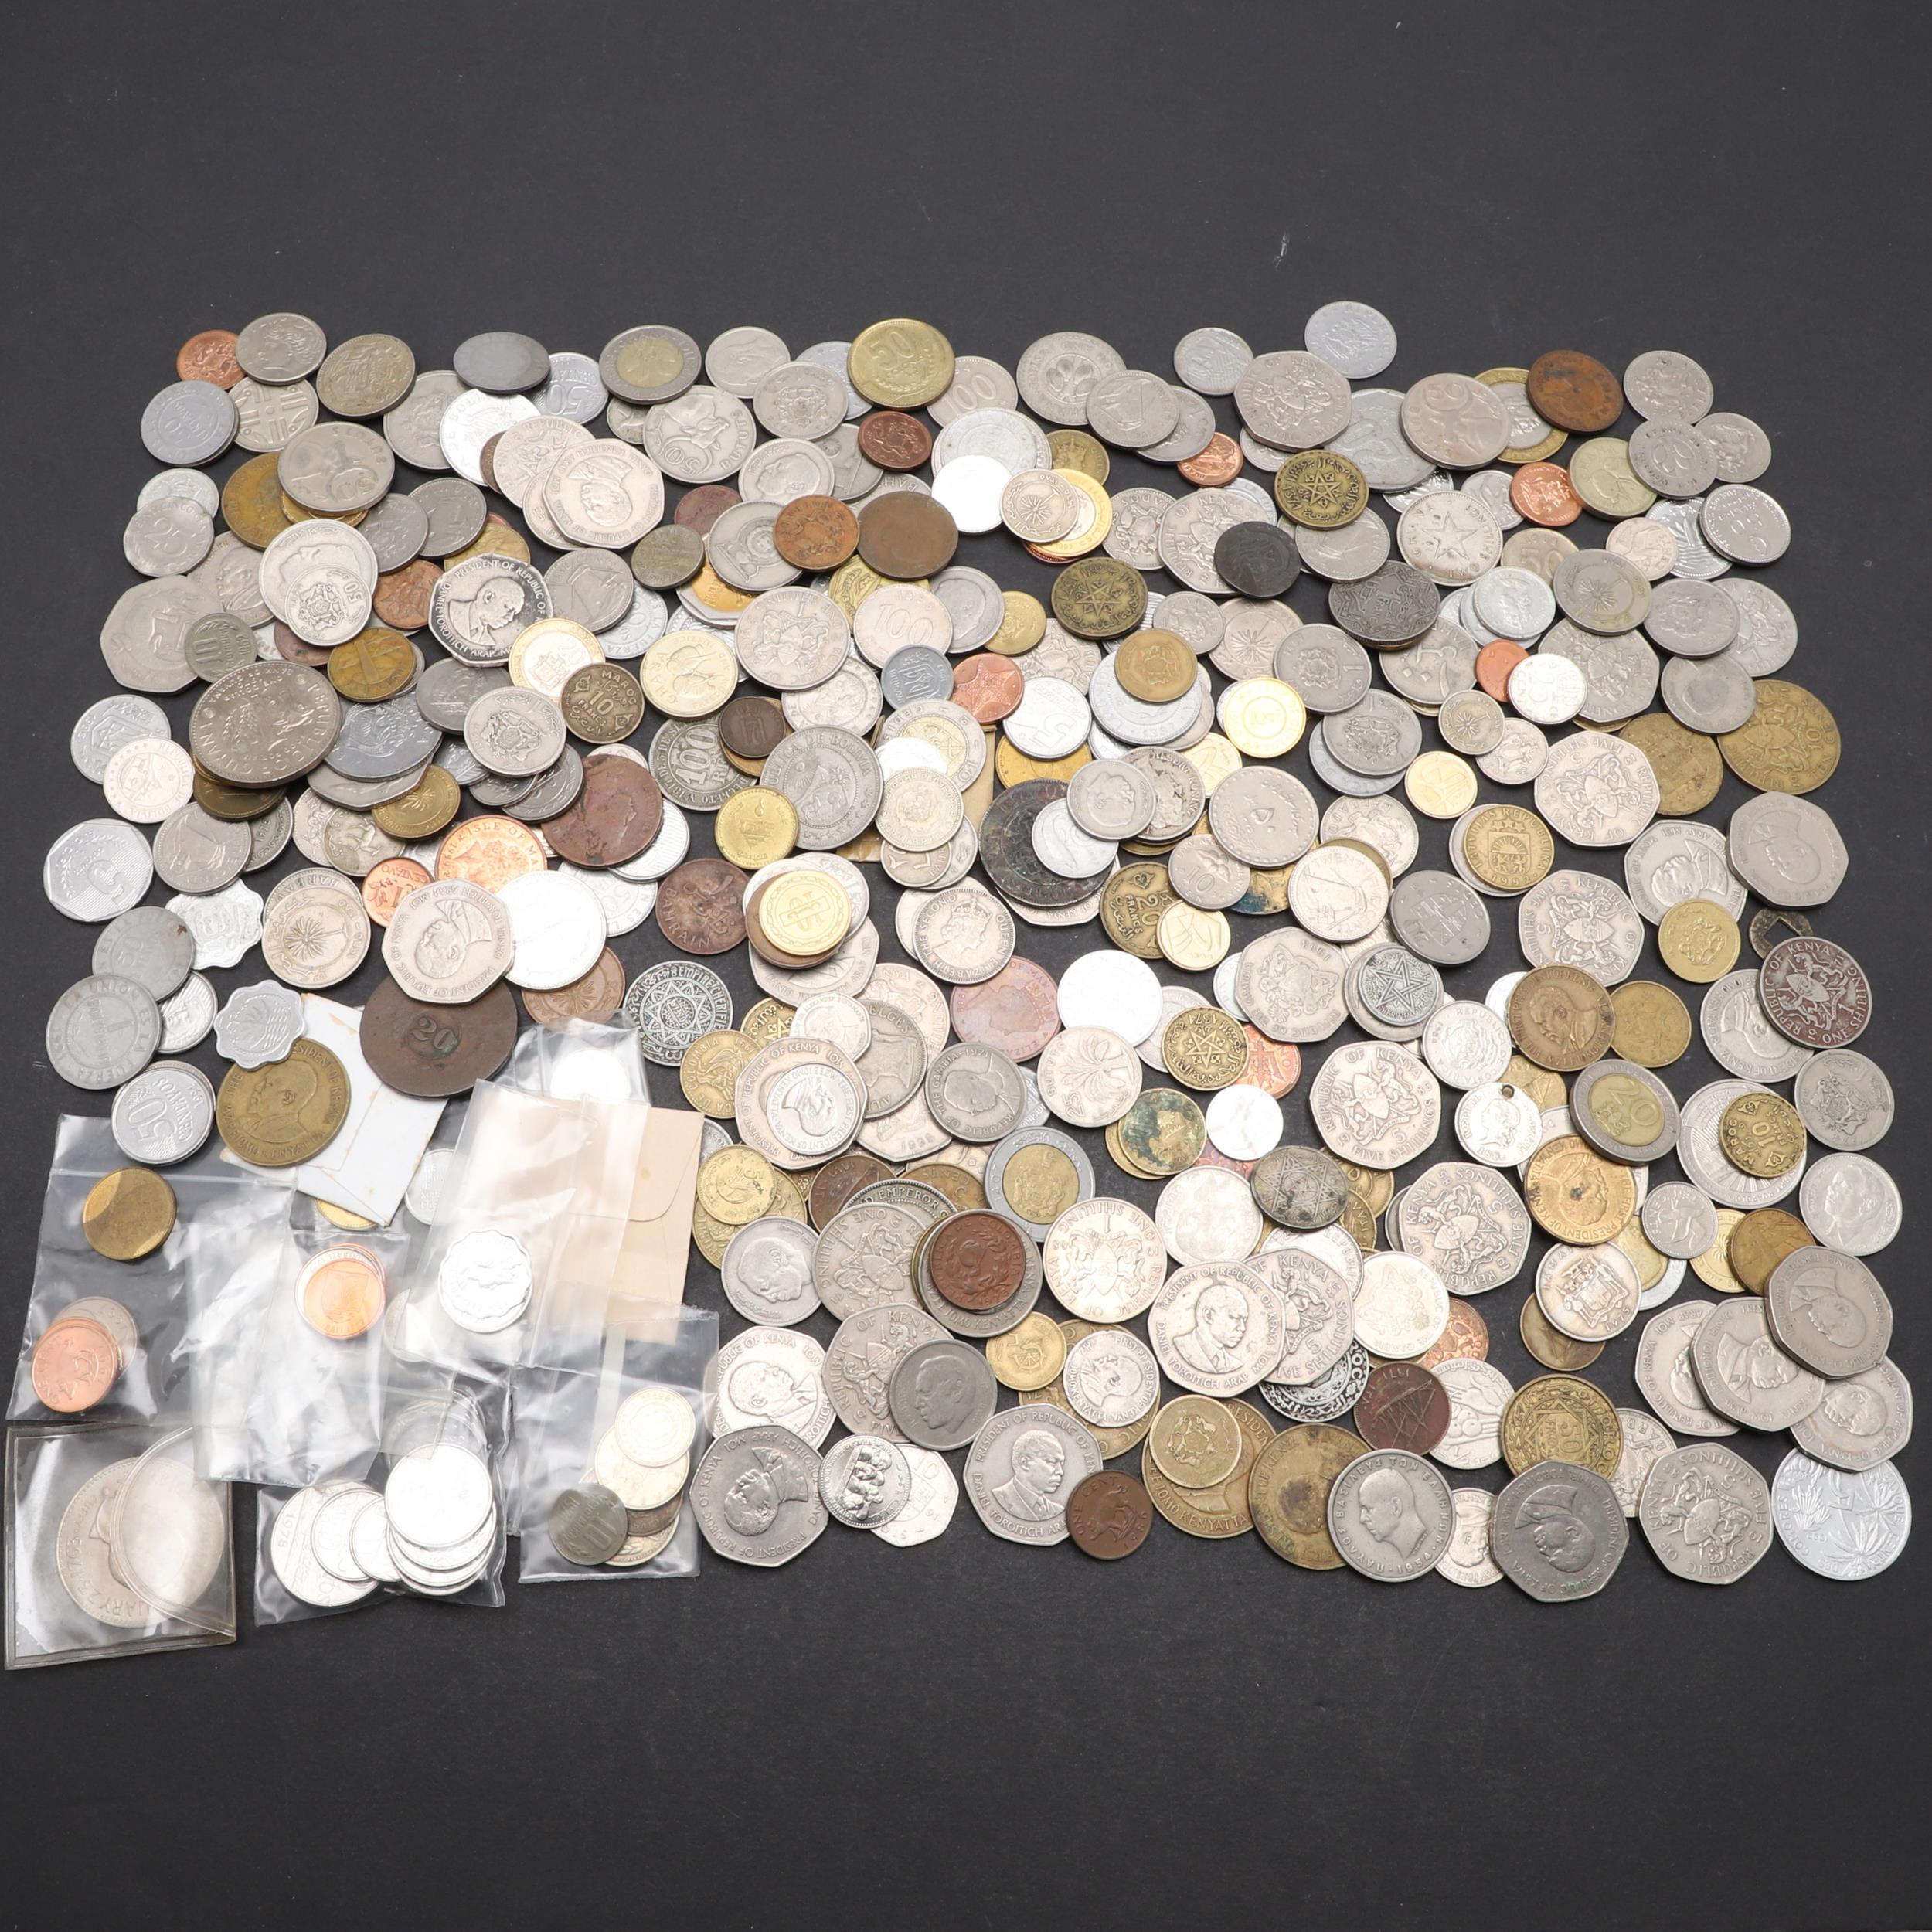 A MIXED COLLECTION OF WORLD COINS FROM VARIOUS COUNTRIES TO INCLUDE COLUMBIA, KENYA, BRASIL AND MANY